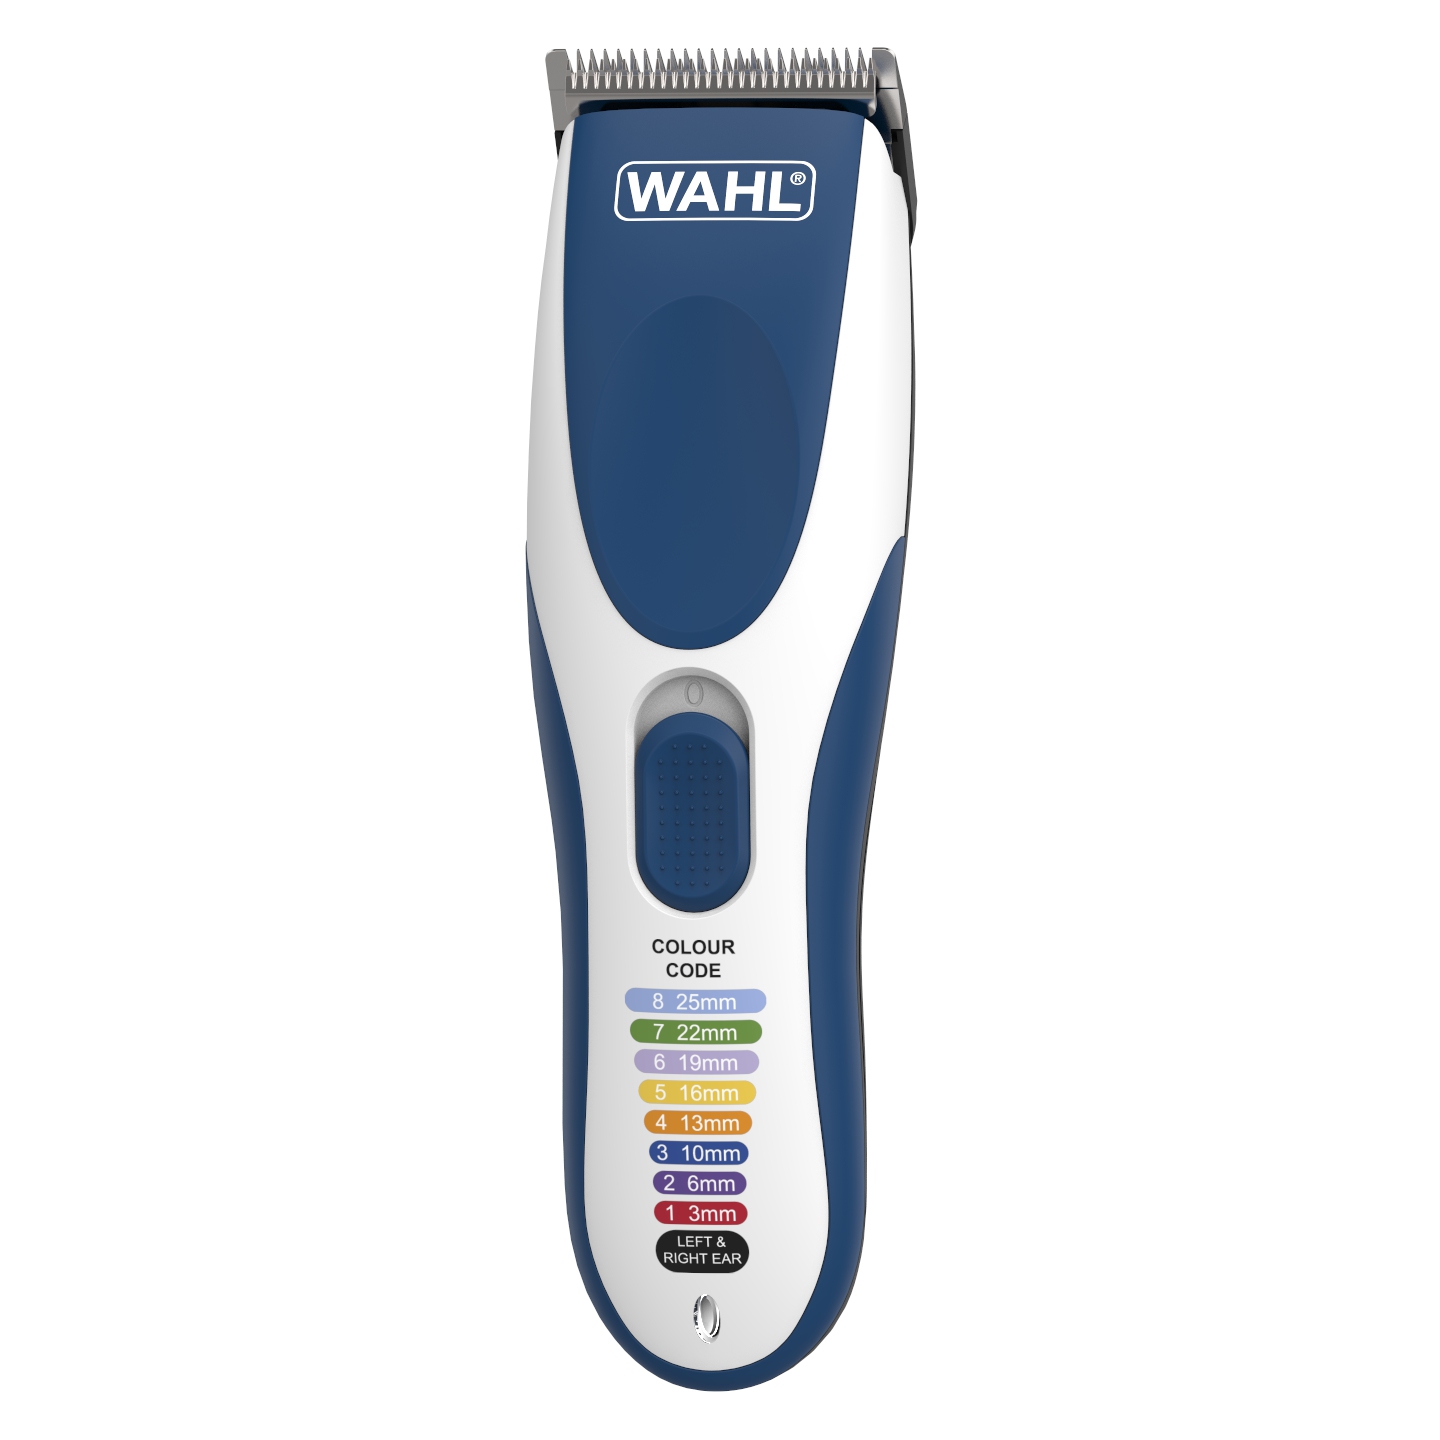 wahl colour coded cordless clipper